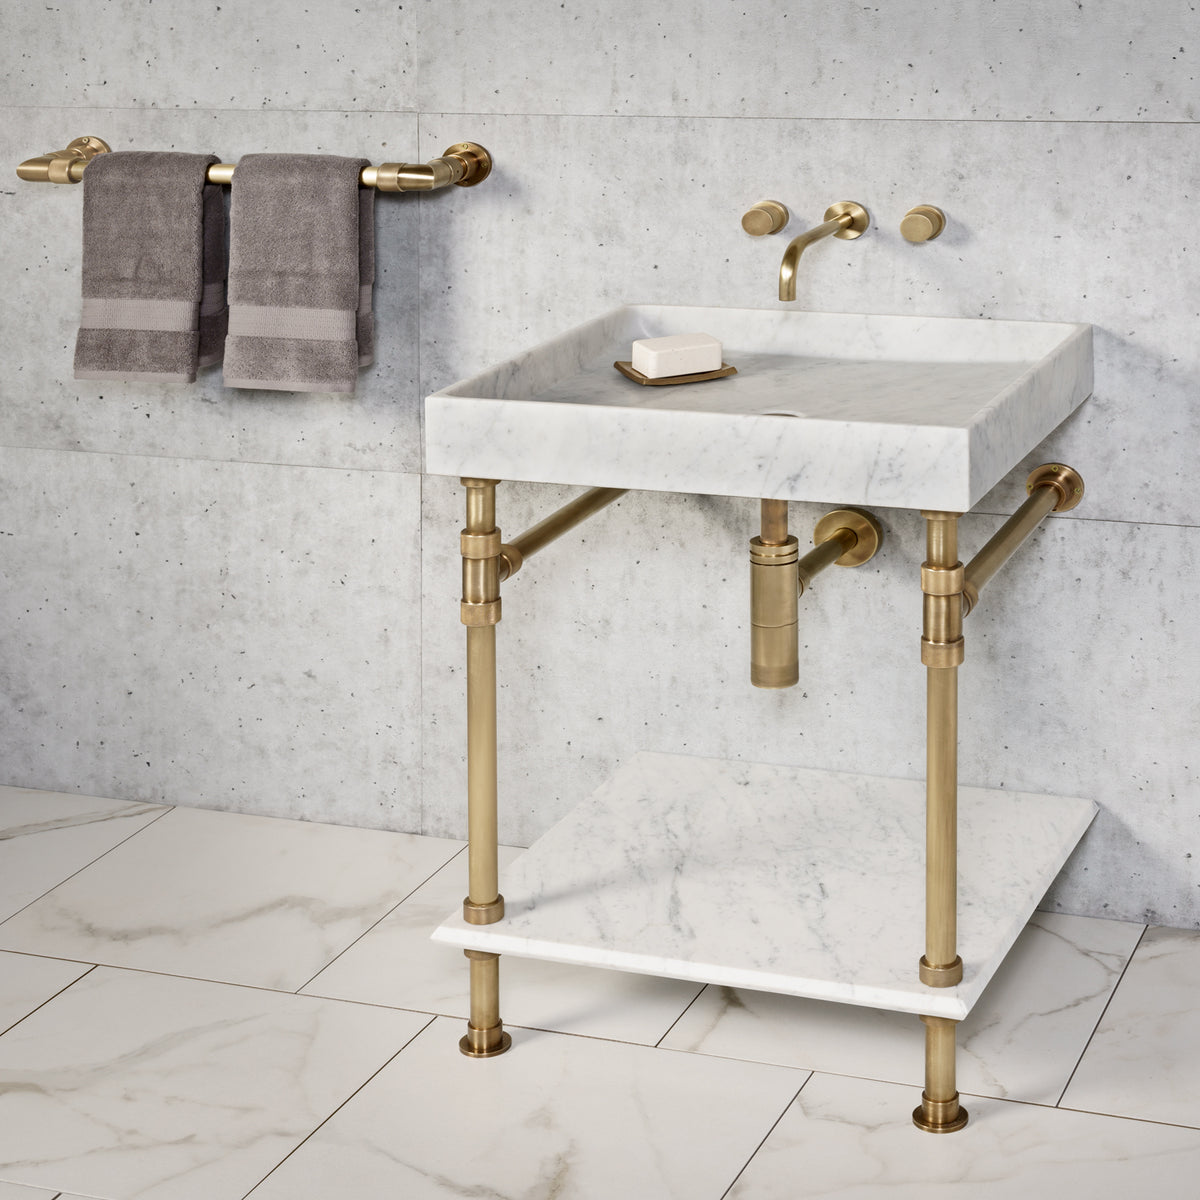 Ventus Bath Sink paired with Elemental Classic Shelf Vanity image 1 of 2